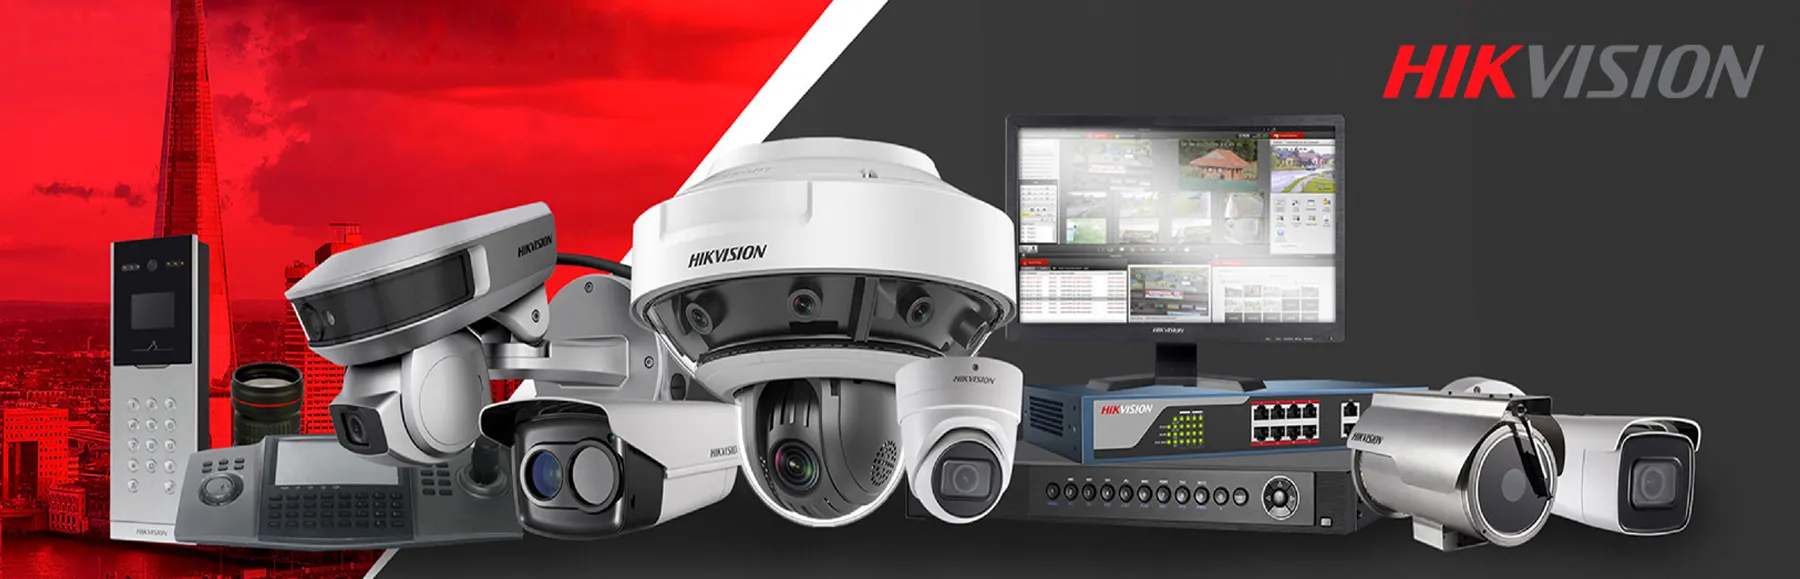 Productos Hikvision